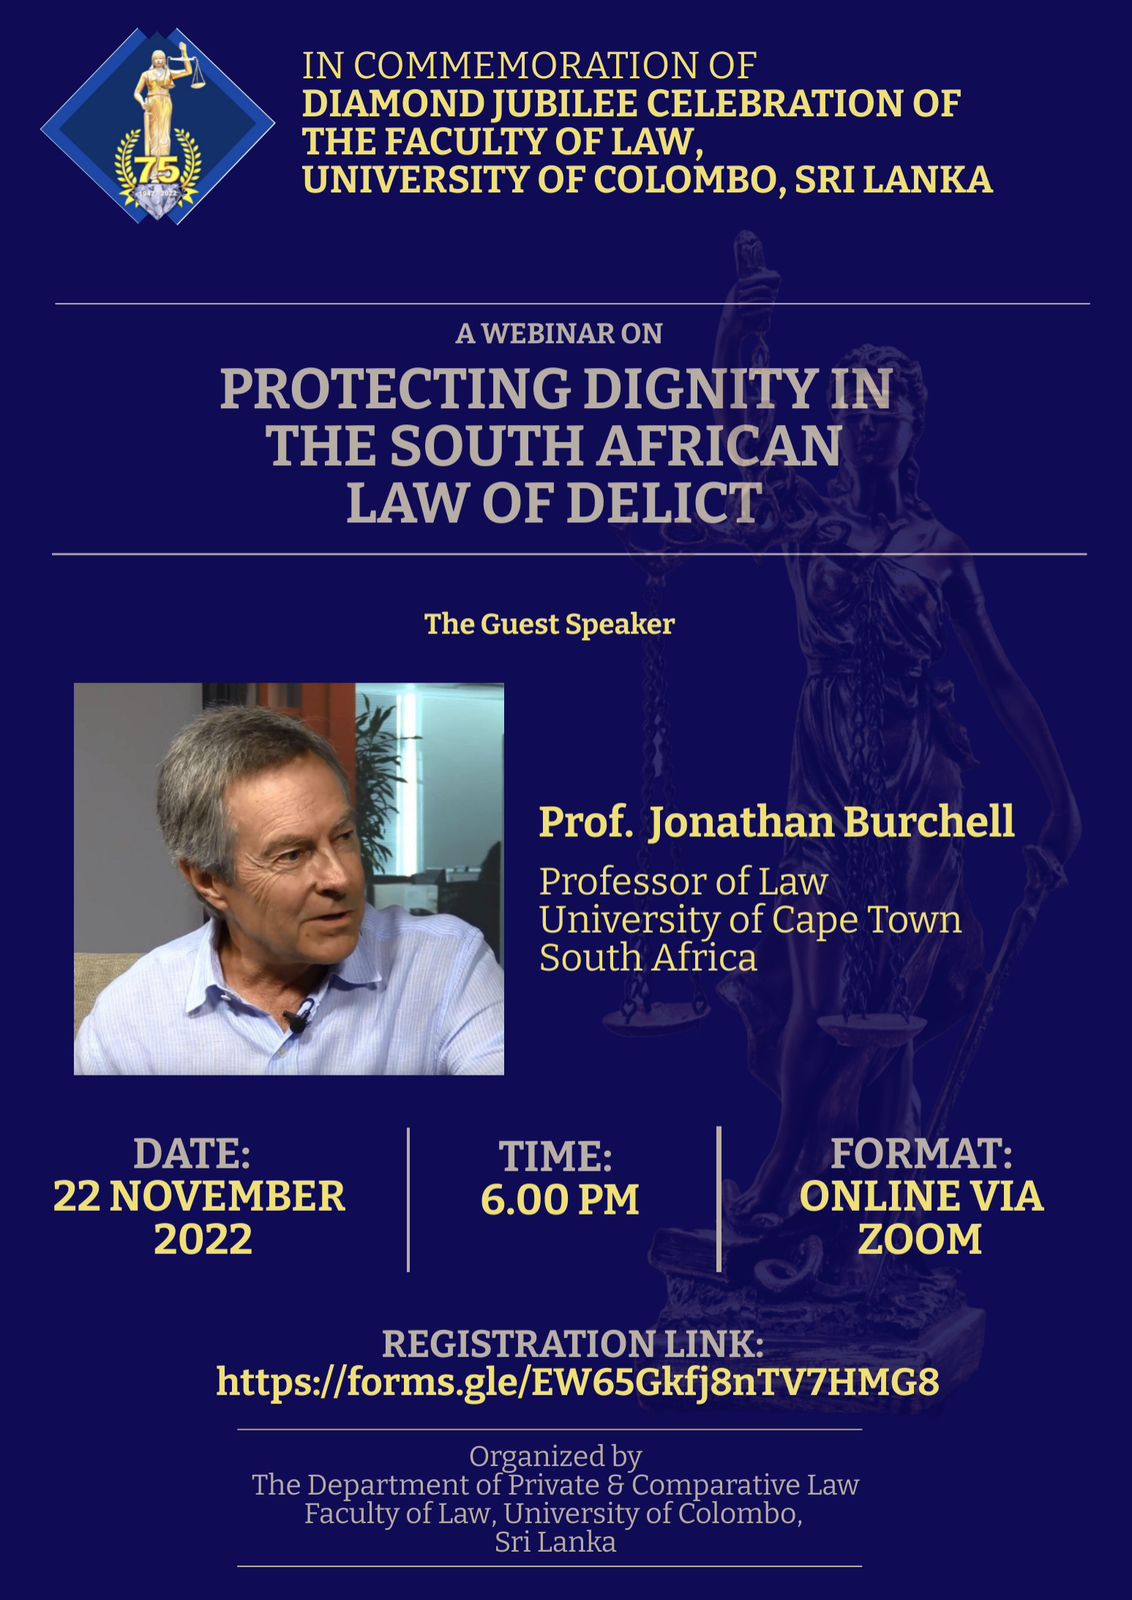 Protect Dignity in the South African Law of Delict – Webinar